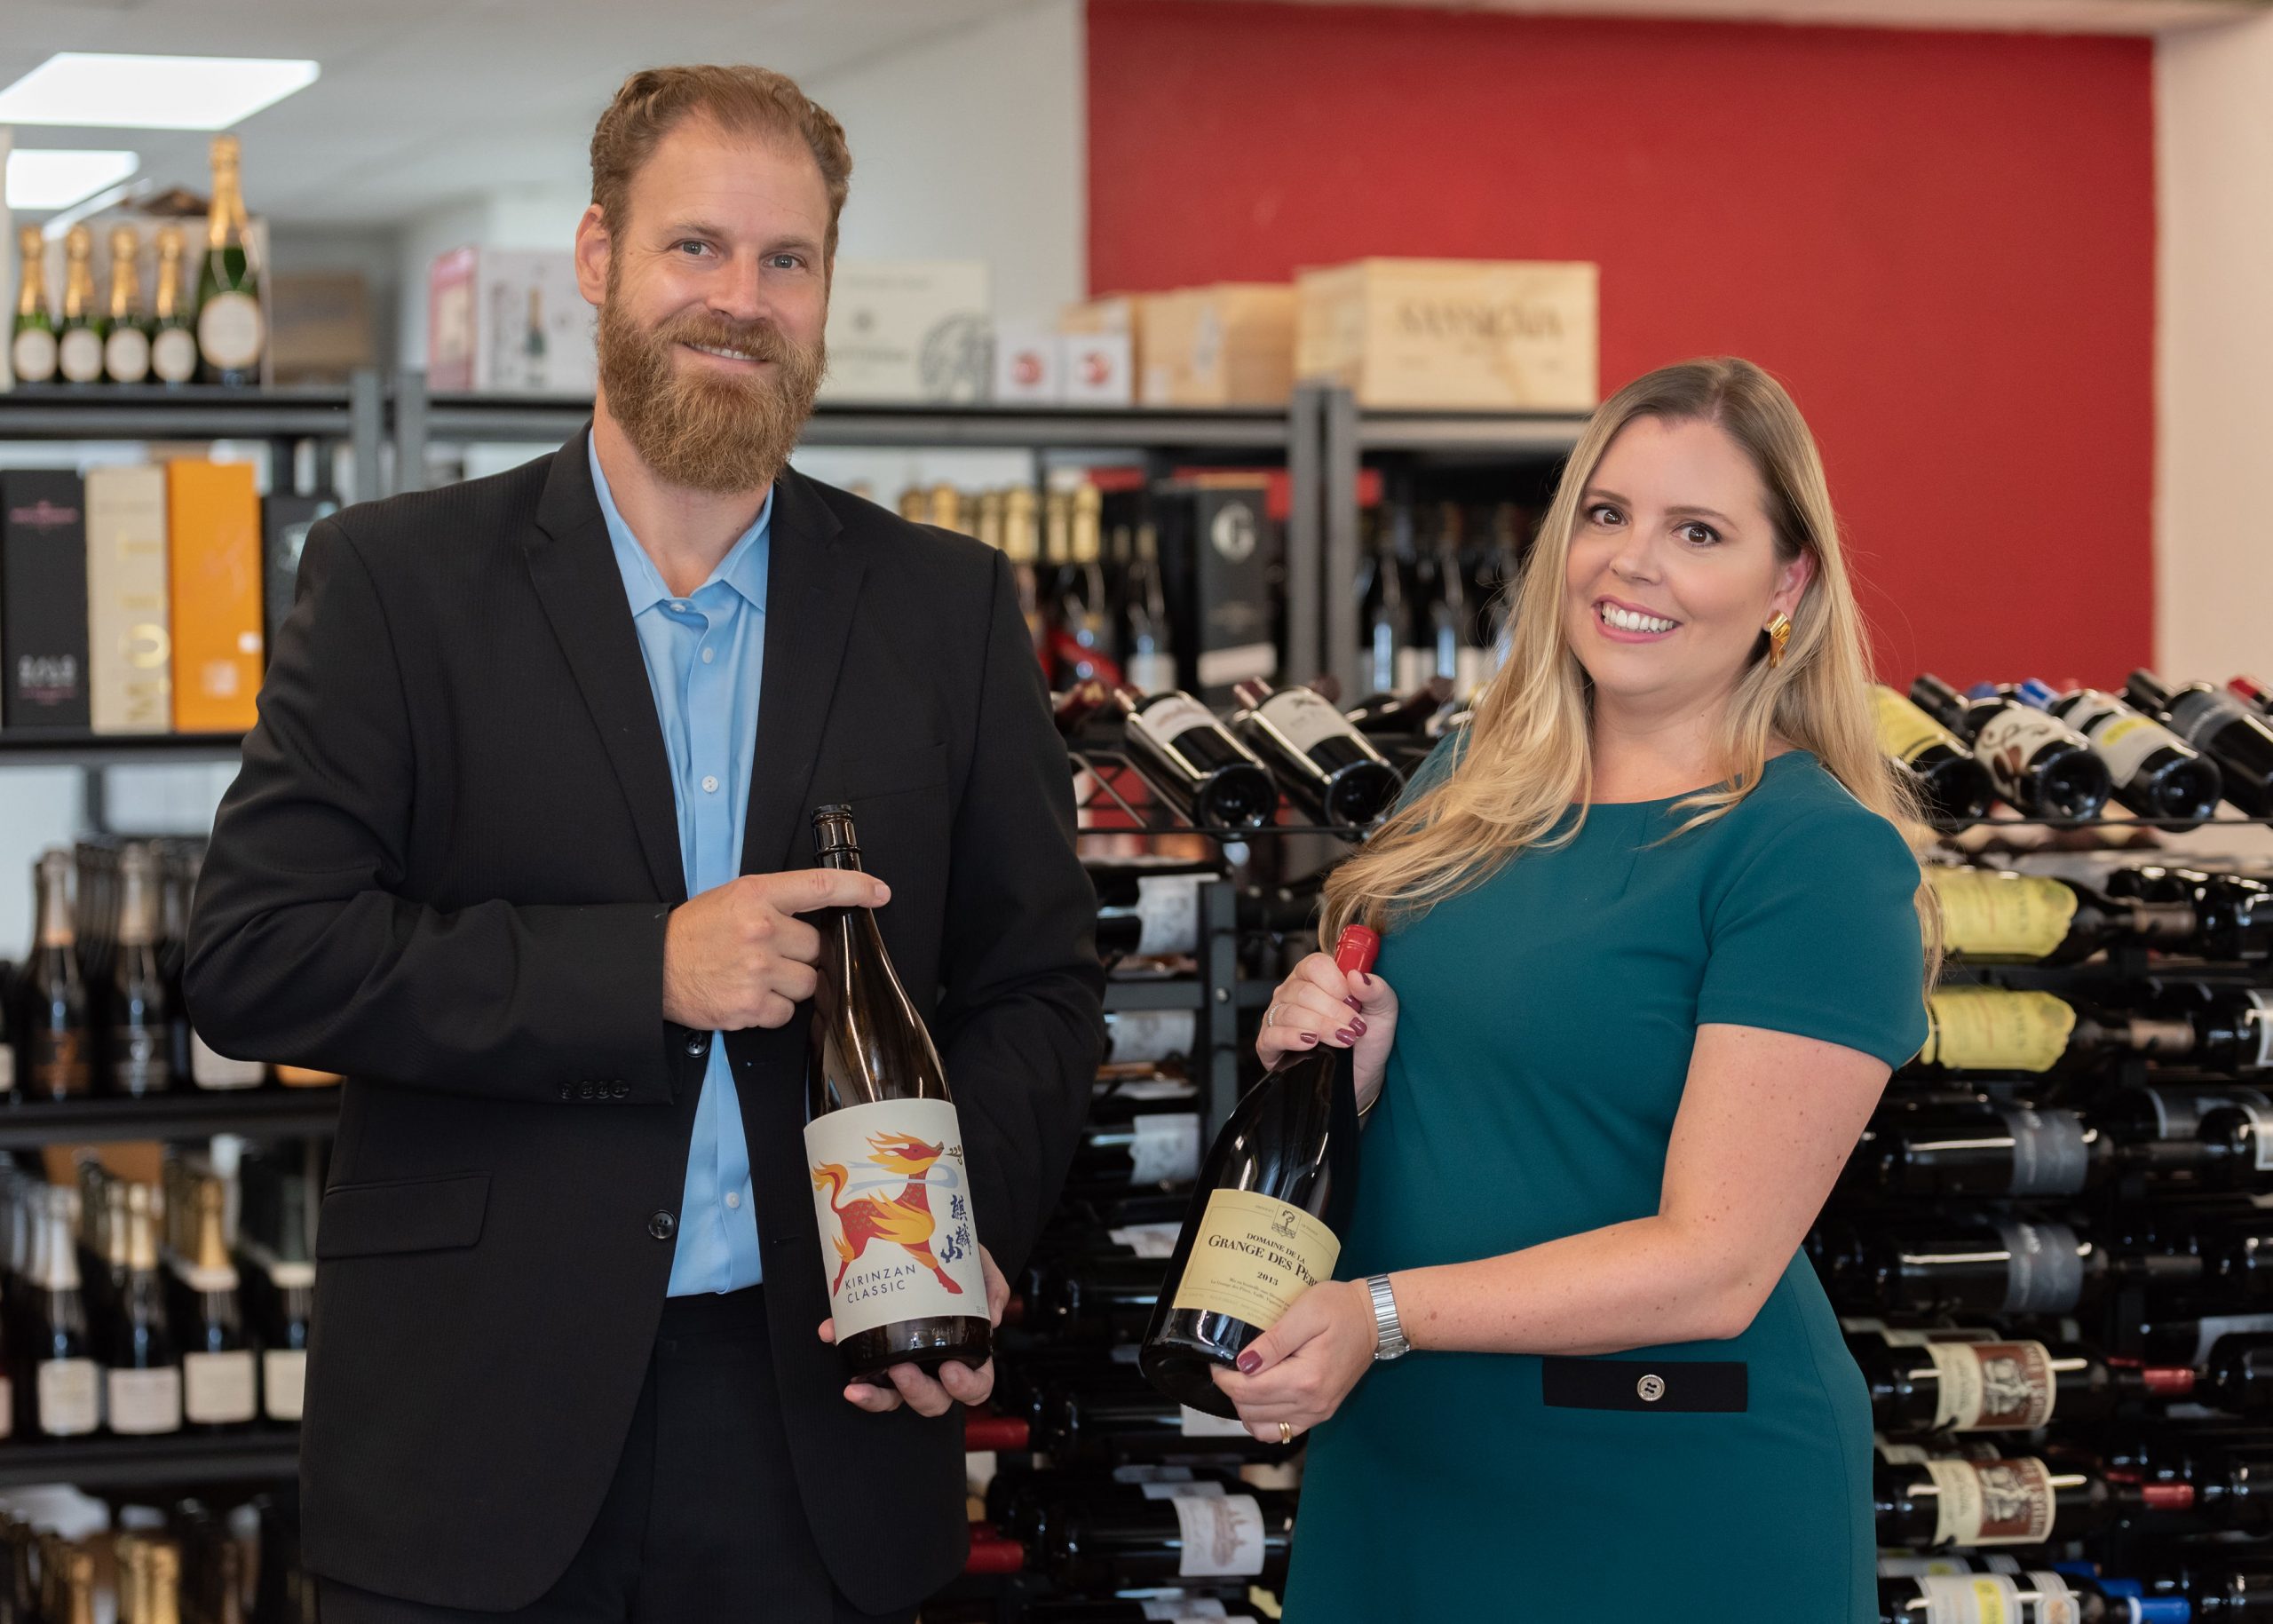 305 Wines Celebrates the Opening of First Retail Wine Shop This Fall